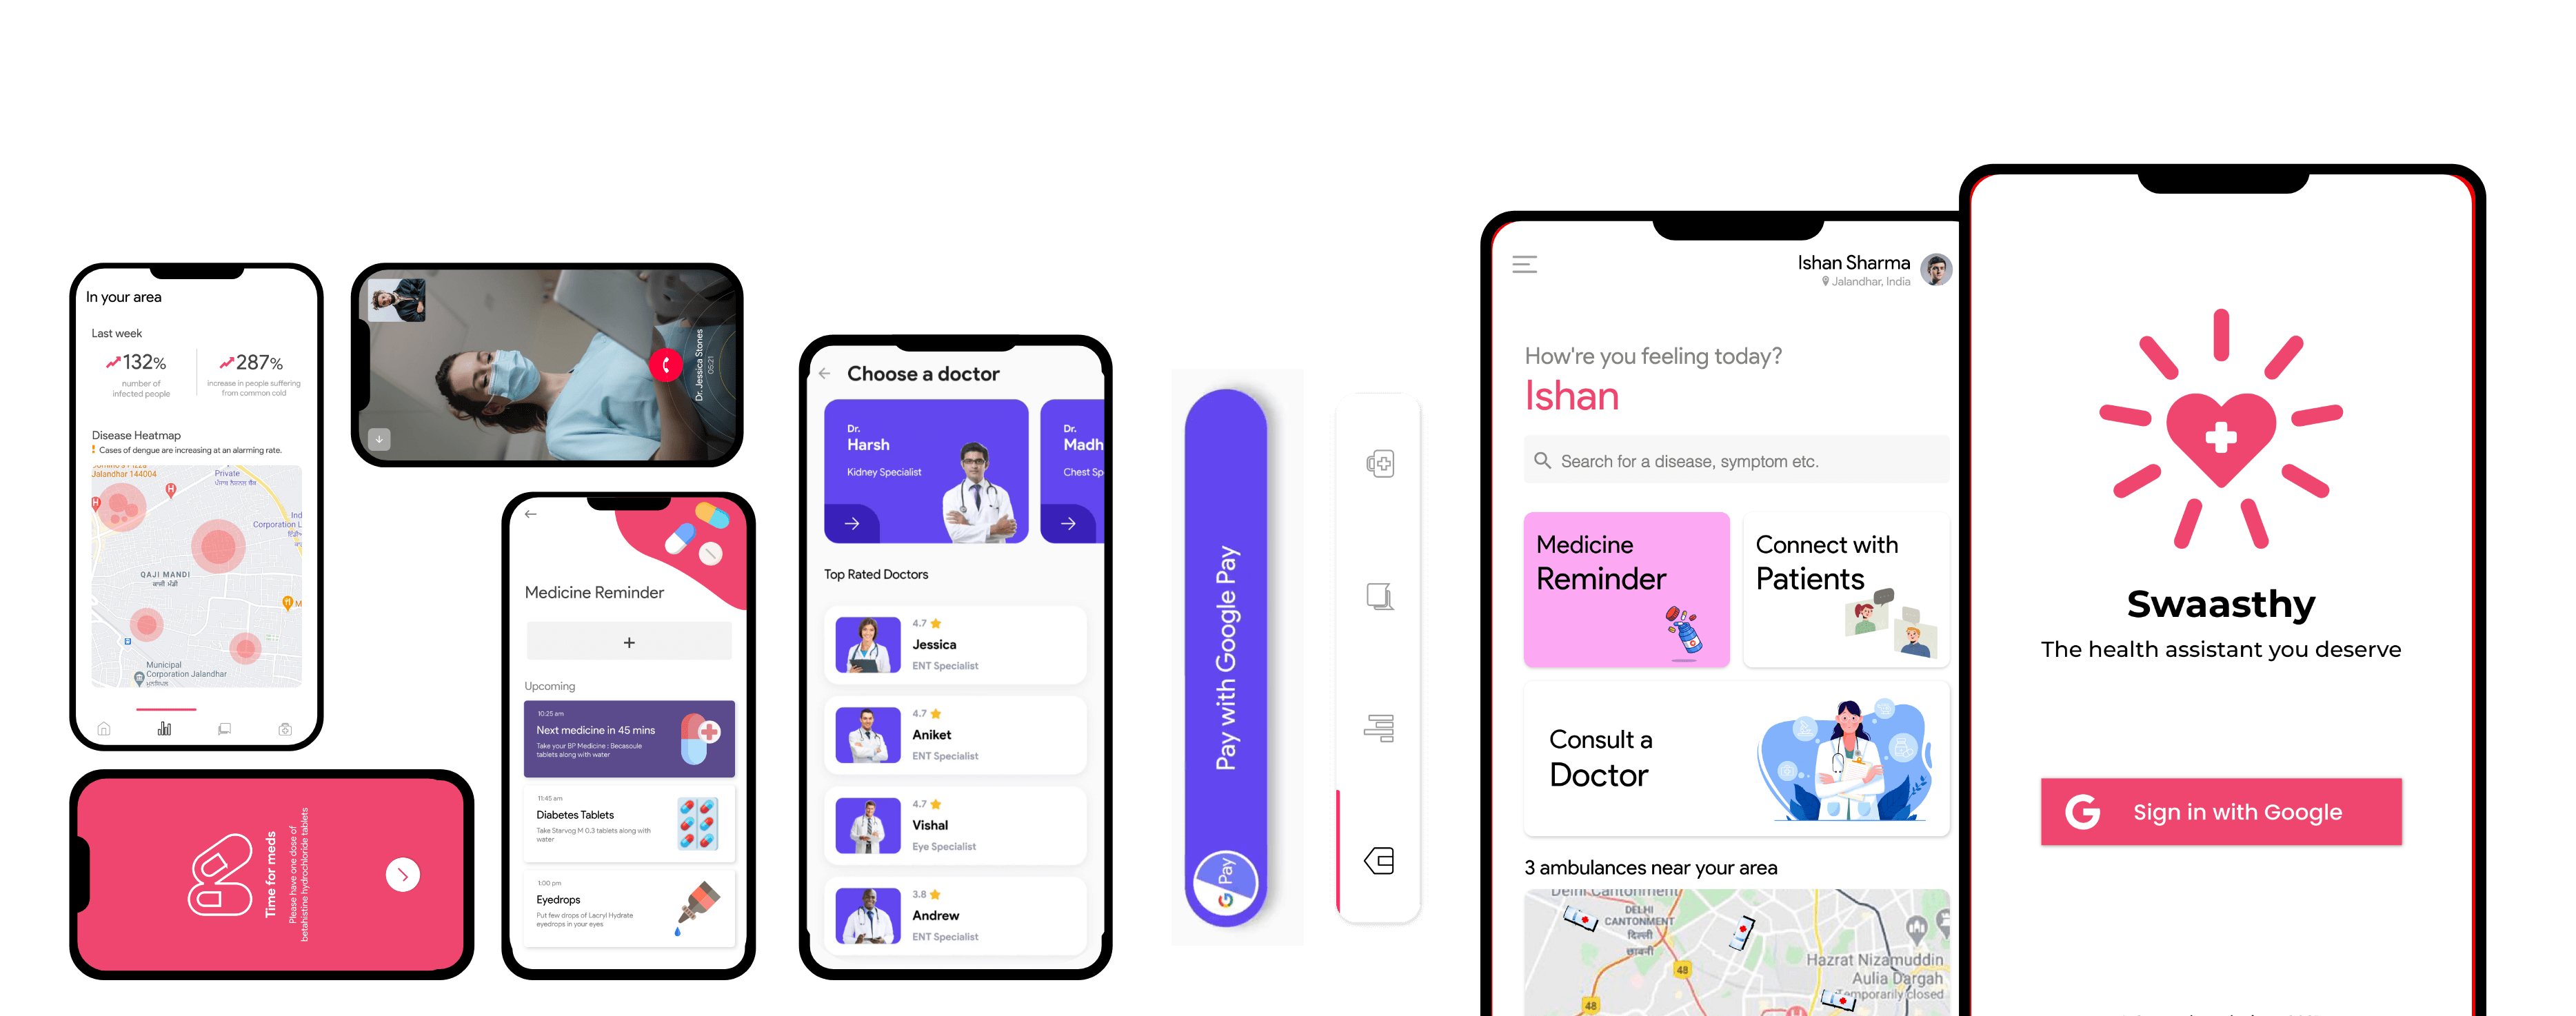 Swaasthy : The only health app you'll ever need